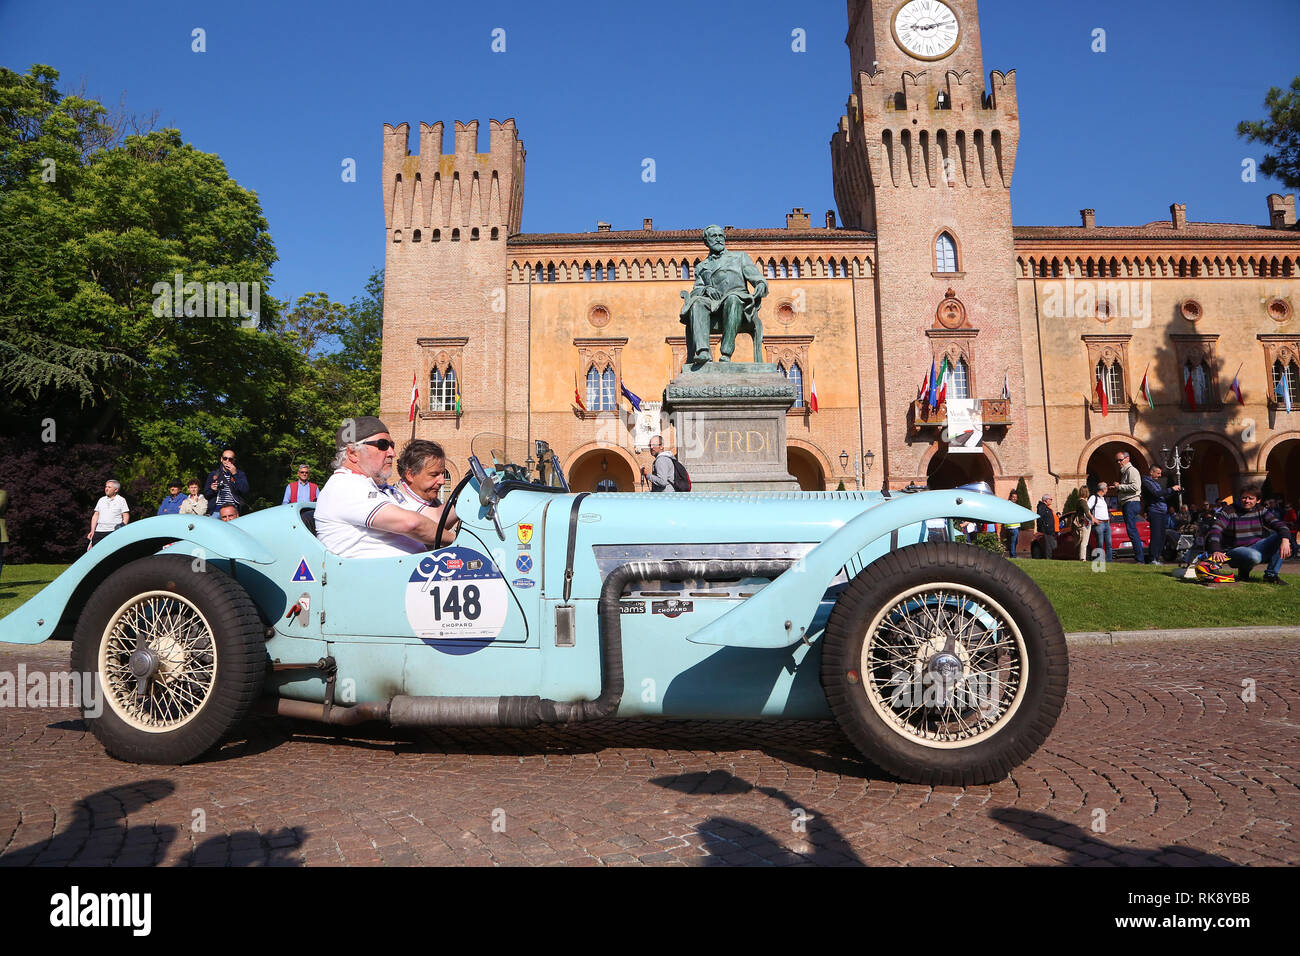 Busseto, Italy - May 21, 2017: Old car of the 30's during Mille Miglia race Stock Photo